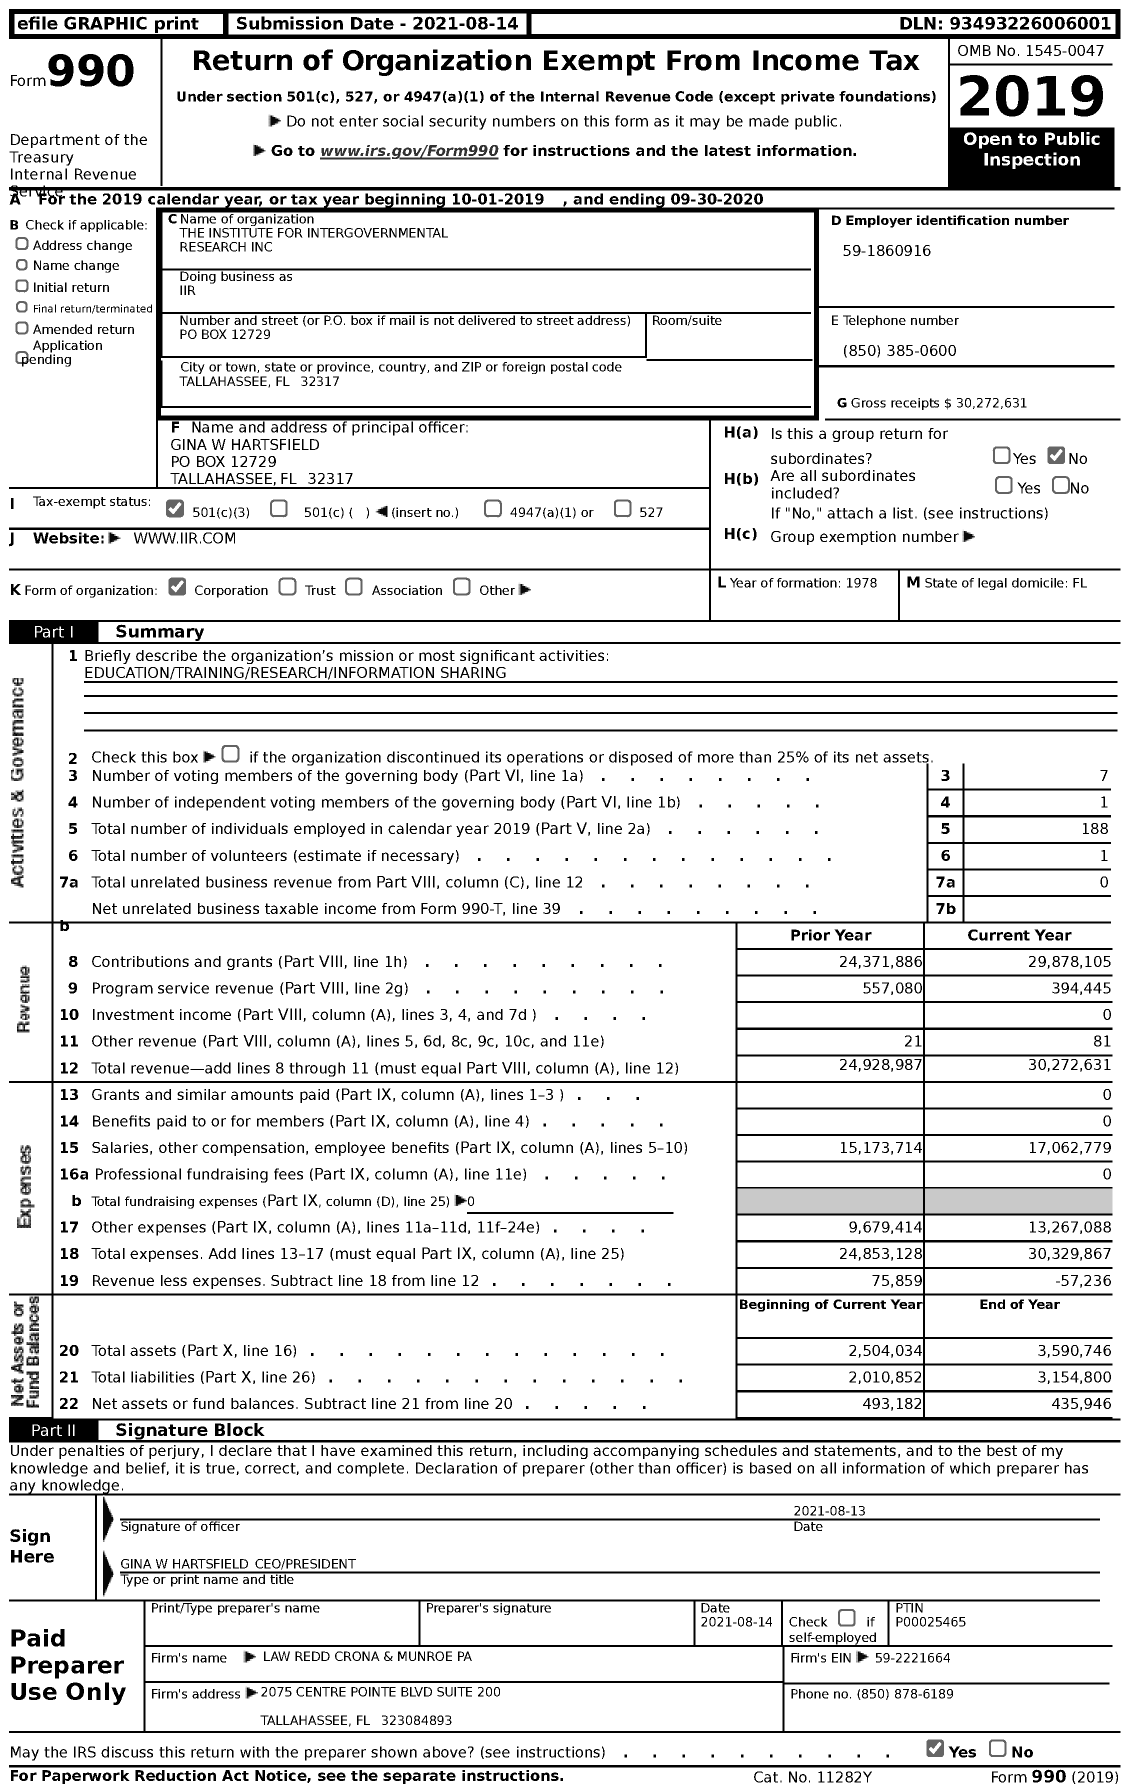 Image of first page of 2019 Form 990 for The Institute for Intergovernmental Research (IIR)